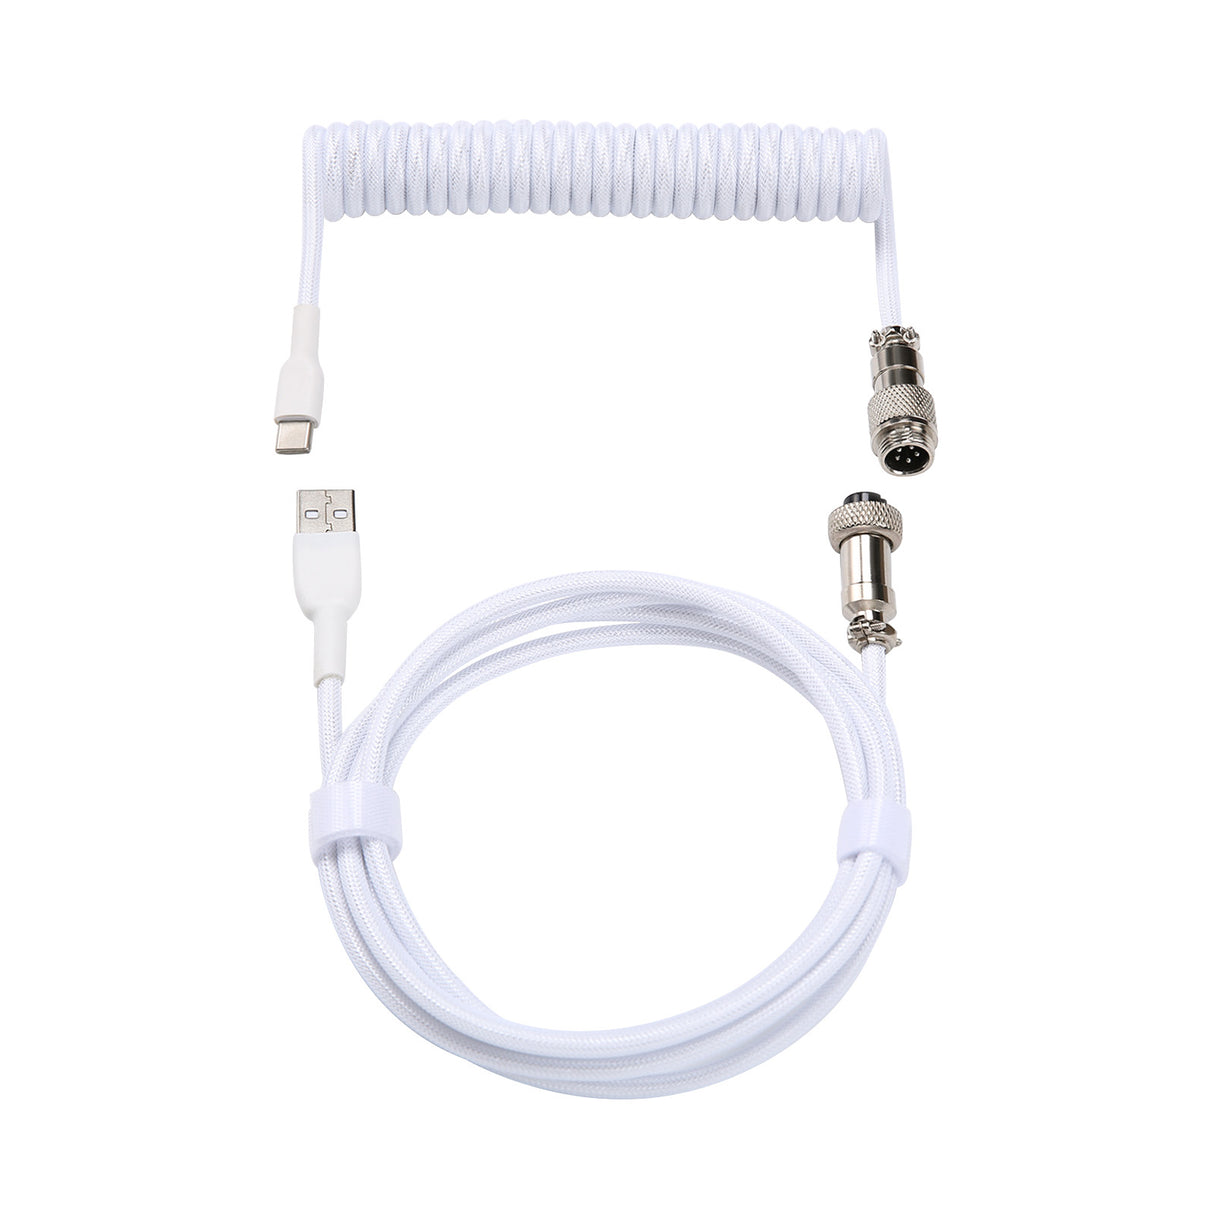 YUNZII Keynovo V3 Coiled Keyboard Cable with Aviator USB Cable for